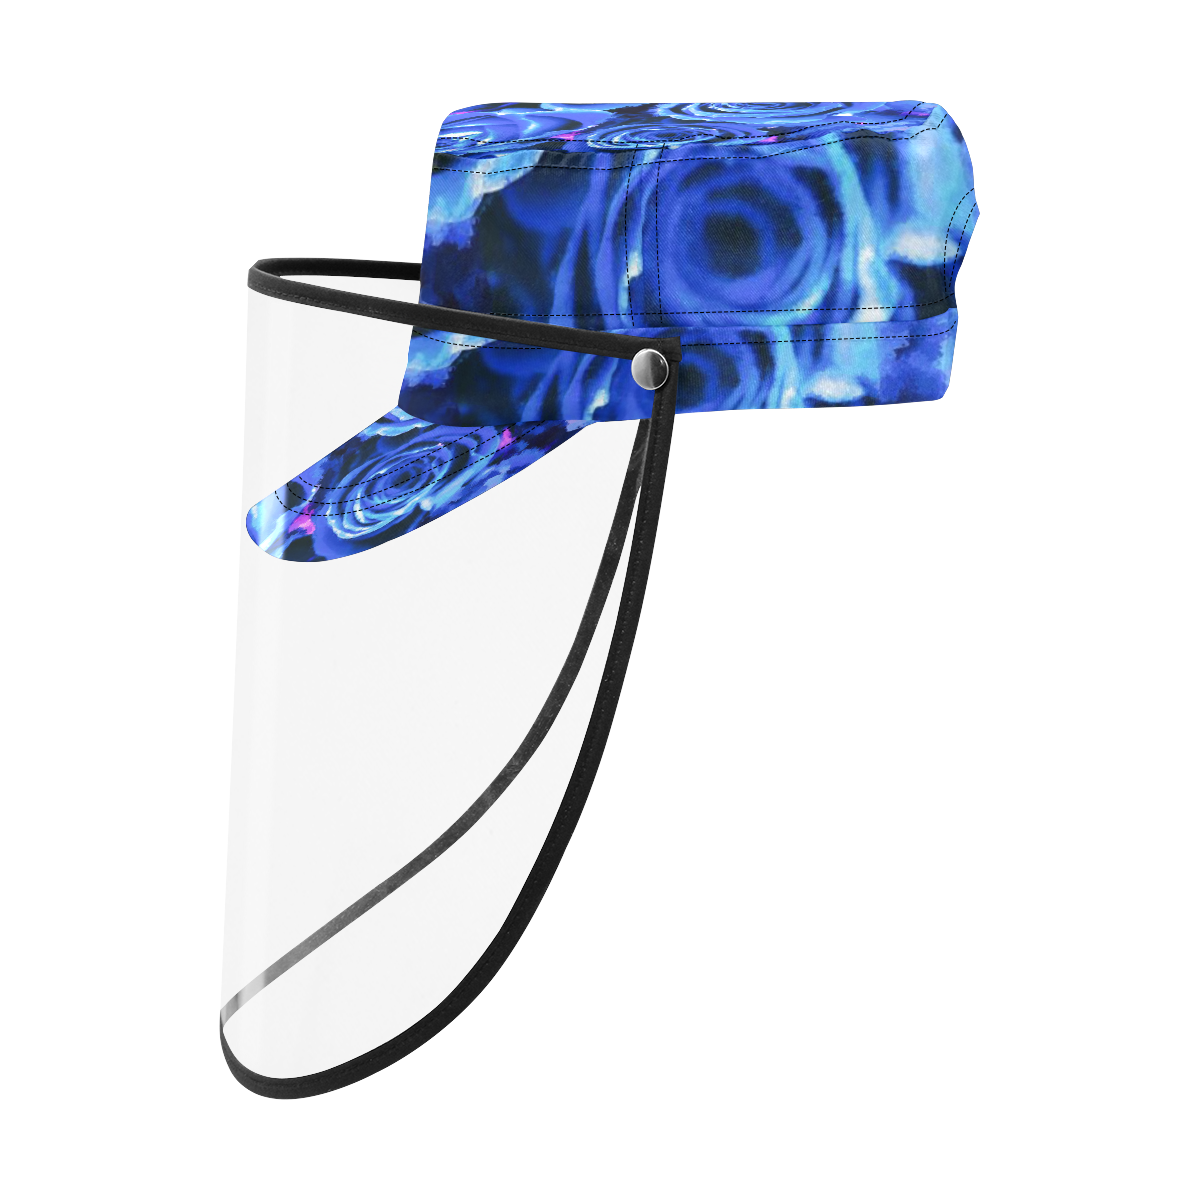 roses are blue Military Style Cap (Detachable Face Shield)